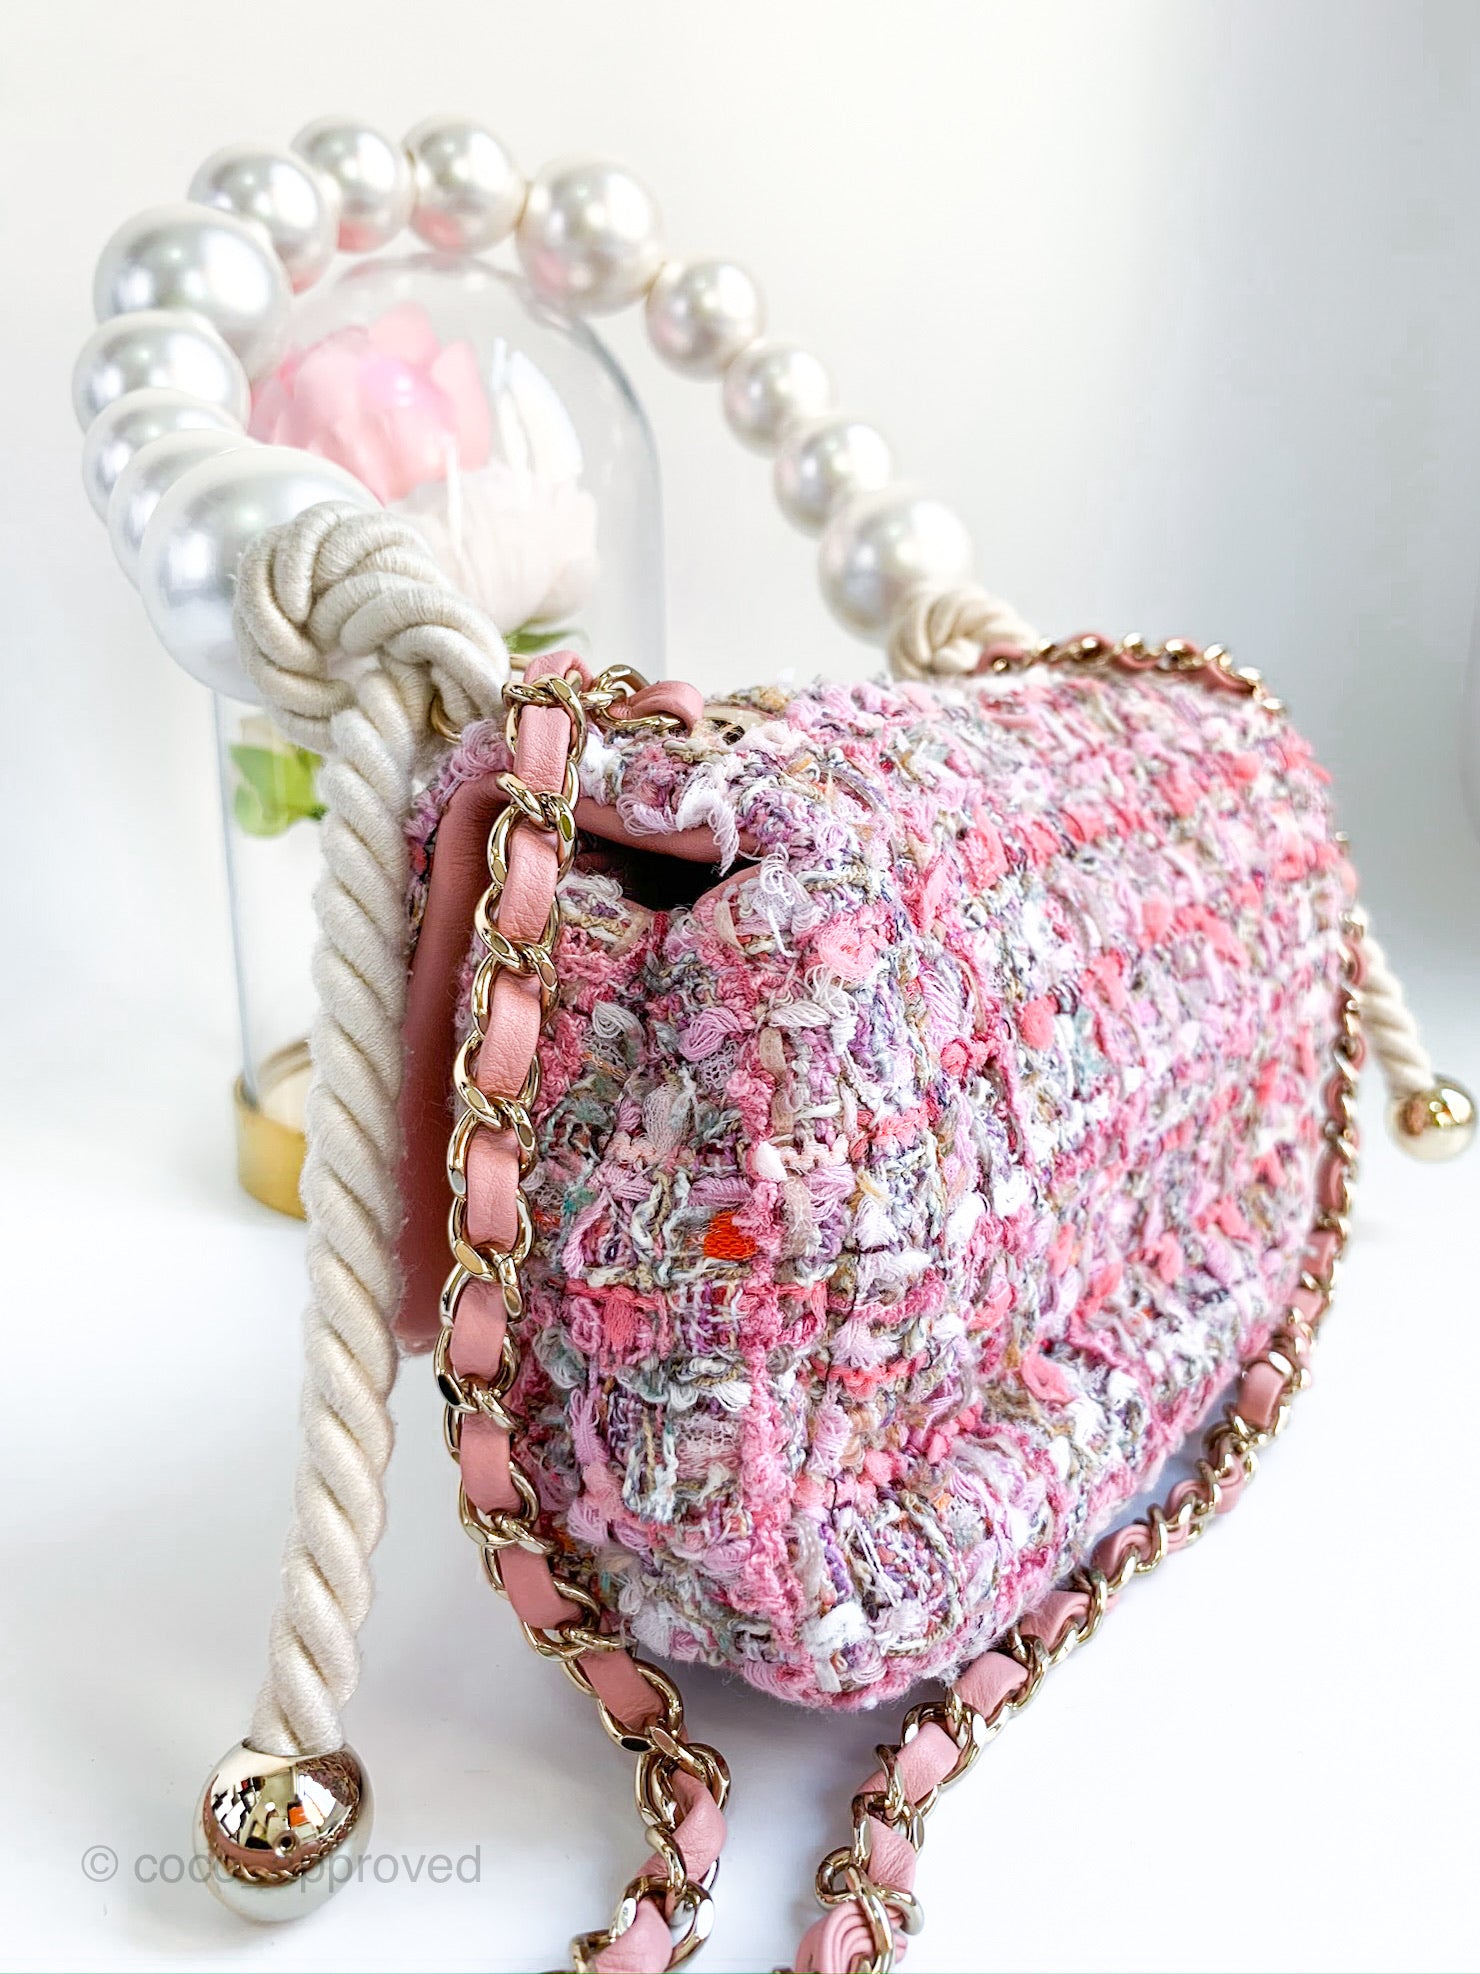 Chanel 19 *Rare* Flap Bag Quilted Tweed Medium In Pink